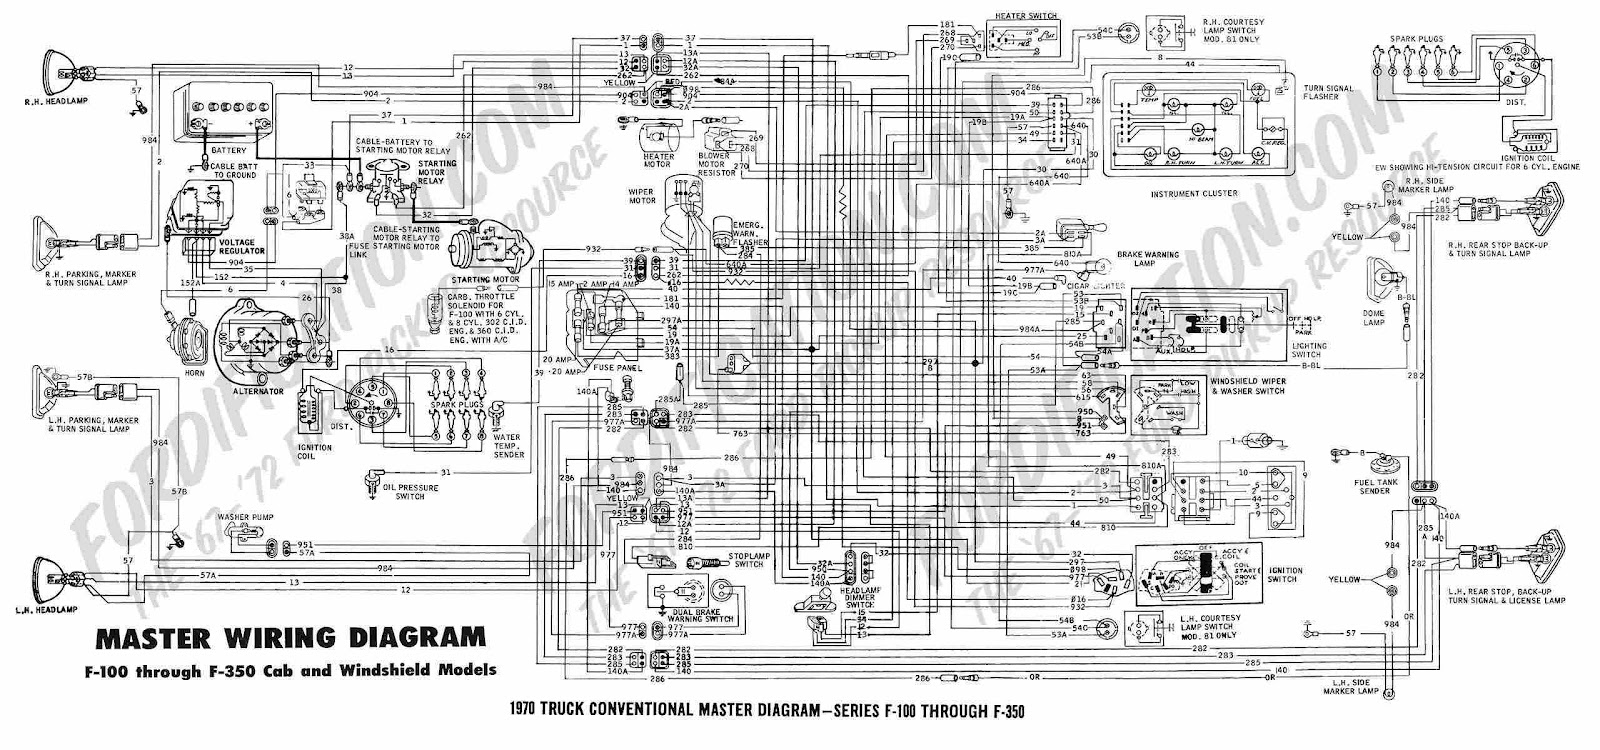 Ford F-100 through F-350 1970 Truck Master Wiring Diagram | All about Wiring Diagrams